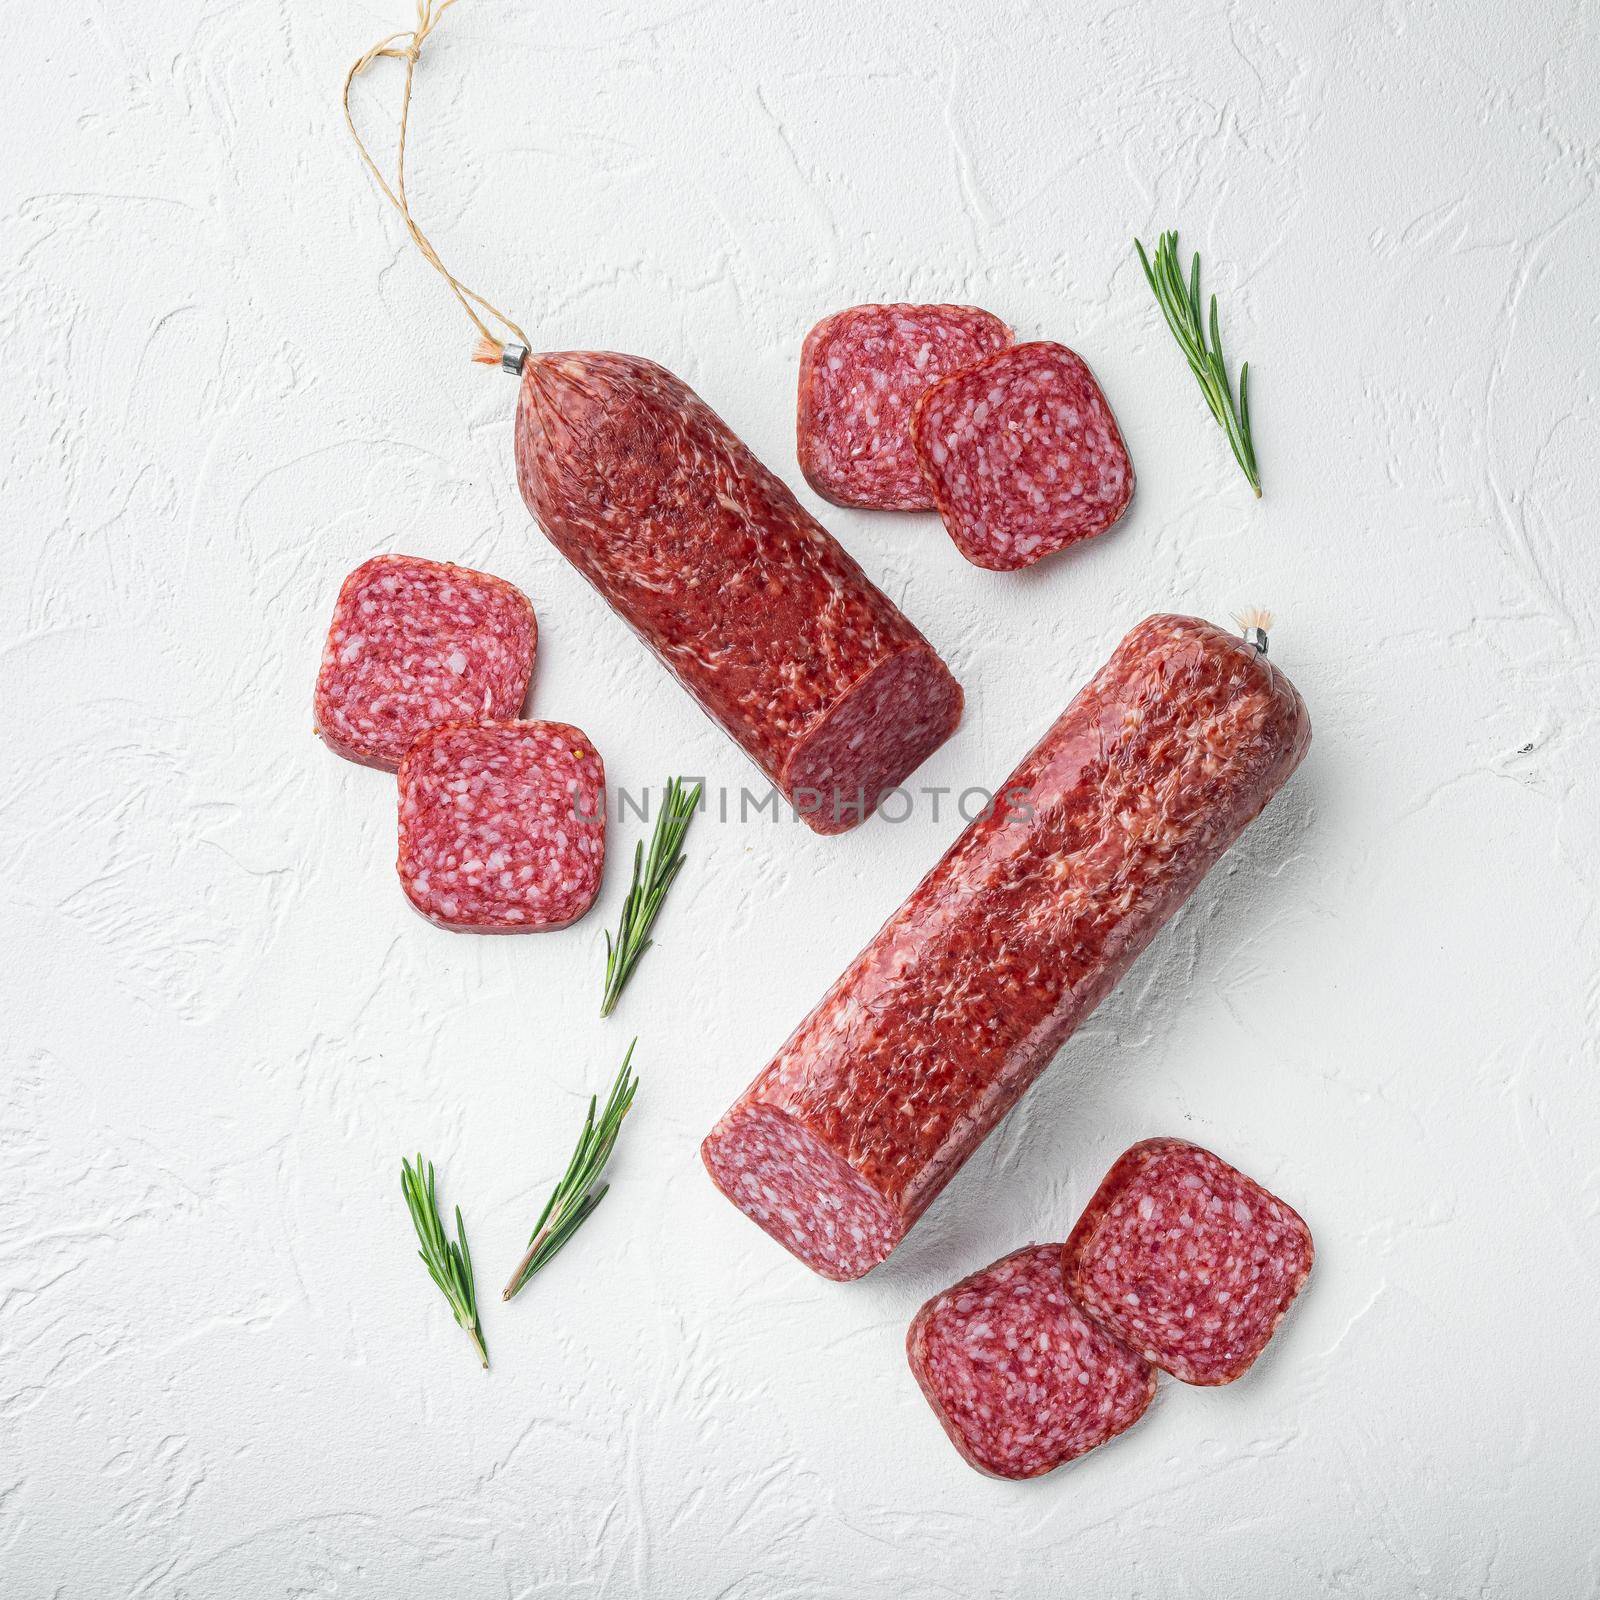 Salami with herbs , garlic set, square format, on white stone table background, top view flat lay